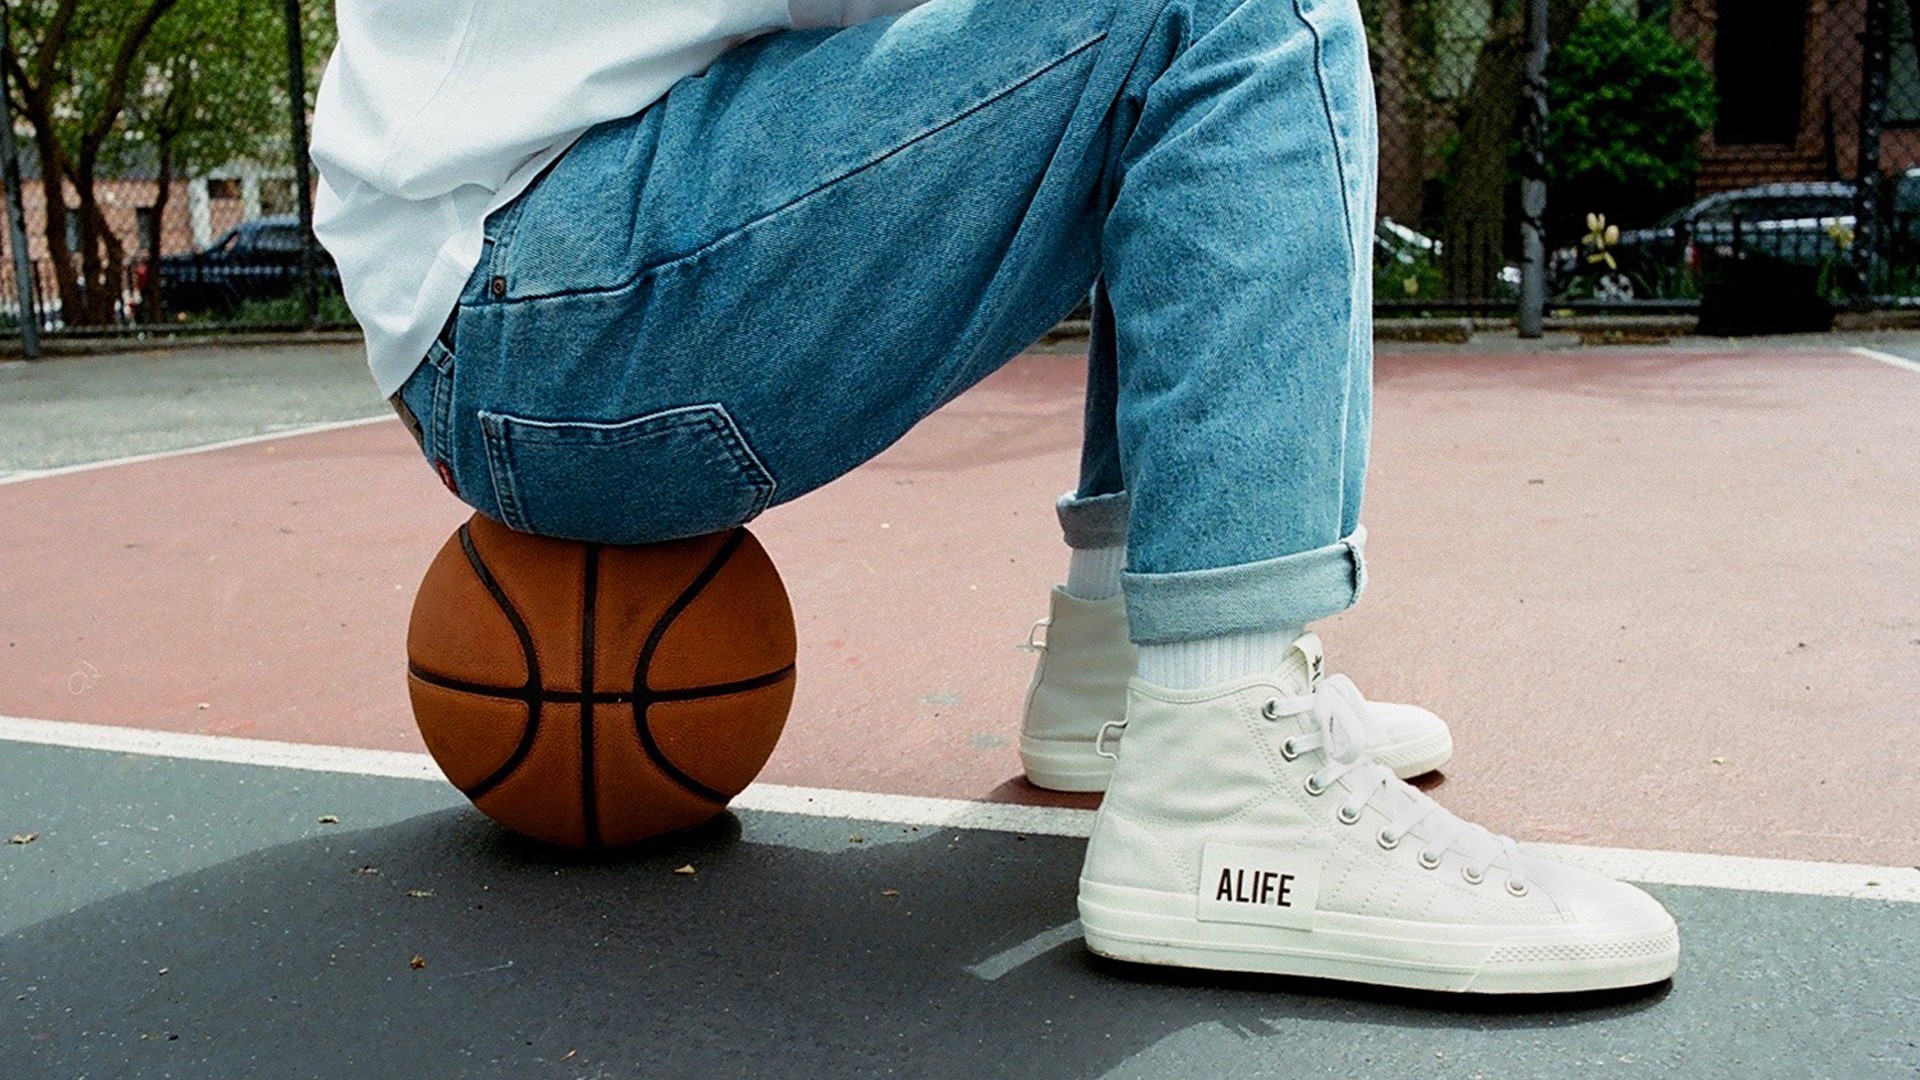 adidas Consortium x NYC'S Alife team up to release Nizza-Hi Silhoutte